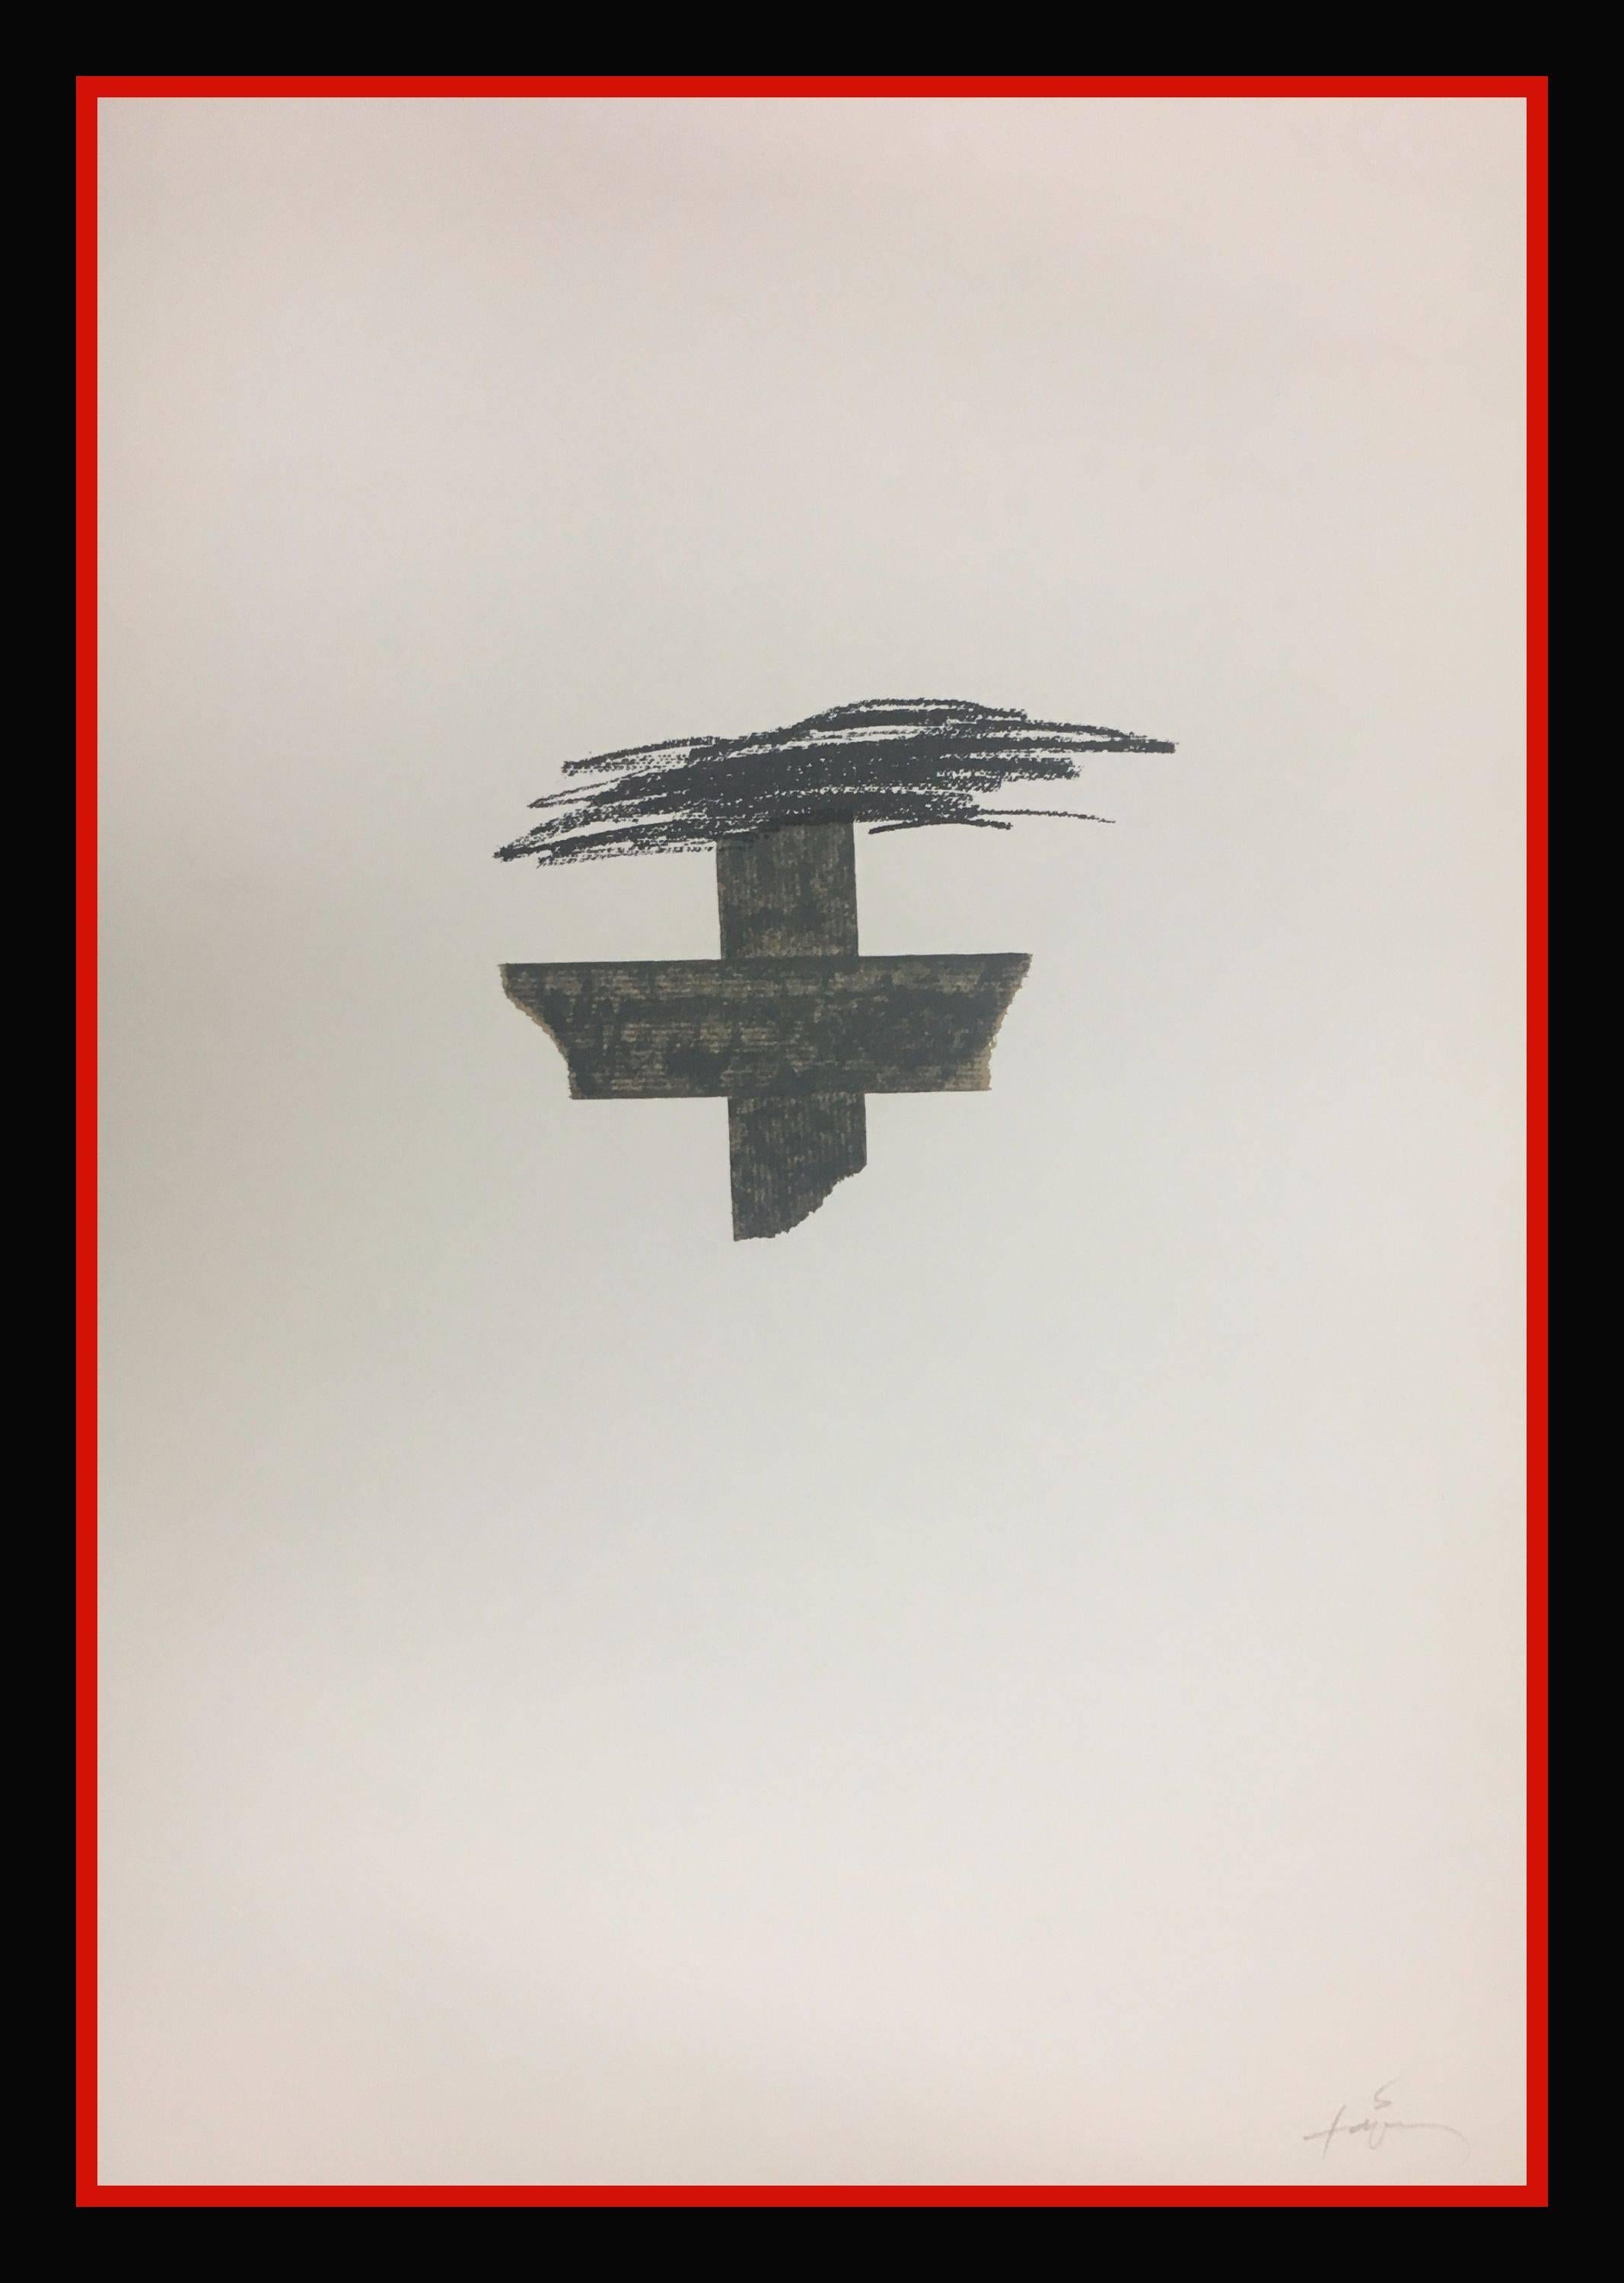 Antoni Tàpies Abstract Print - Tapies  Black Cross  Vertical 1975 original lithography painting